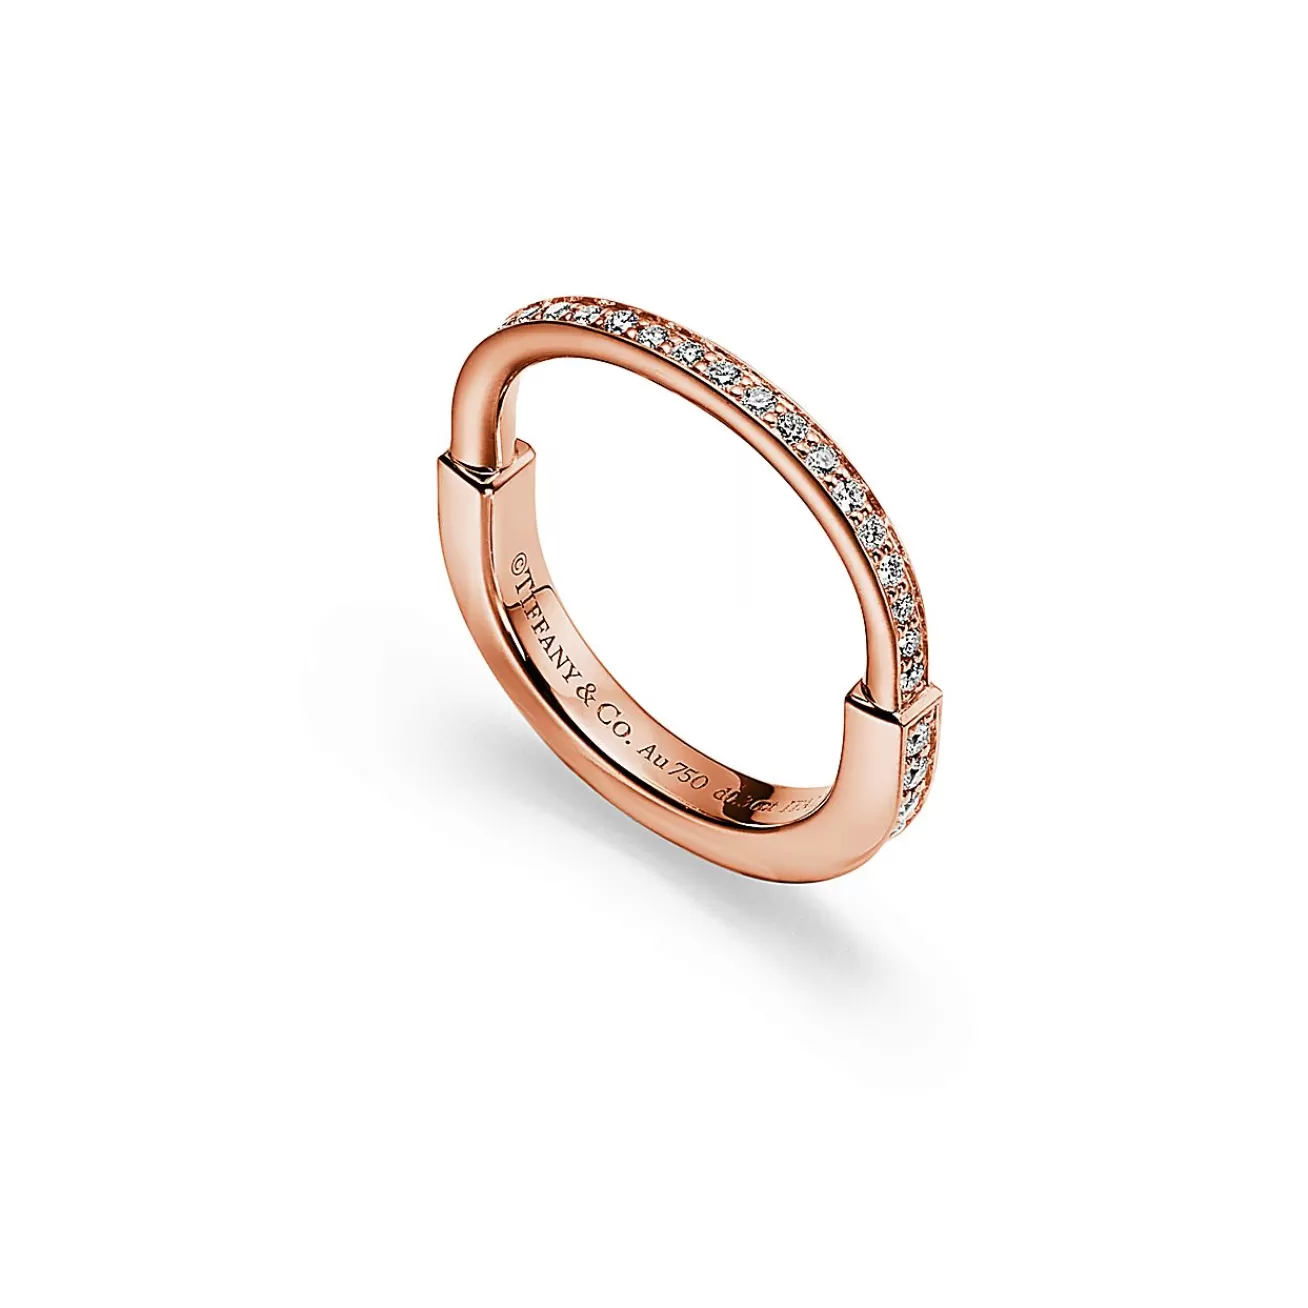 Tiffany & Co. Tiffany Lock Ring in Rose Gold with Pavé Diamonds | ^ Rings | Gifts for Her